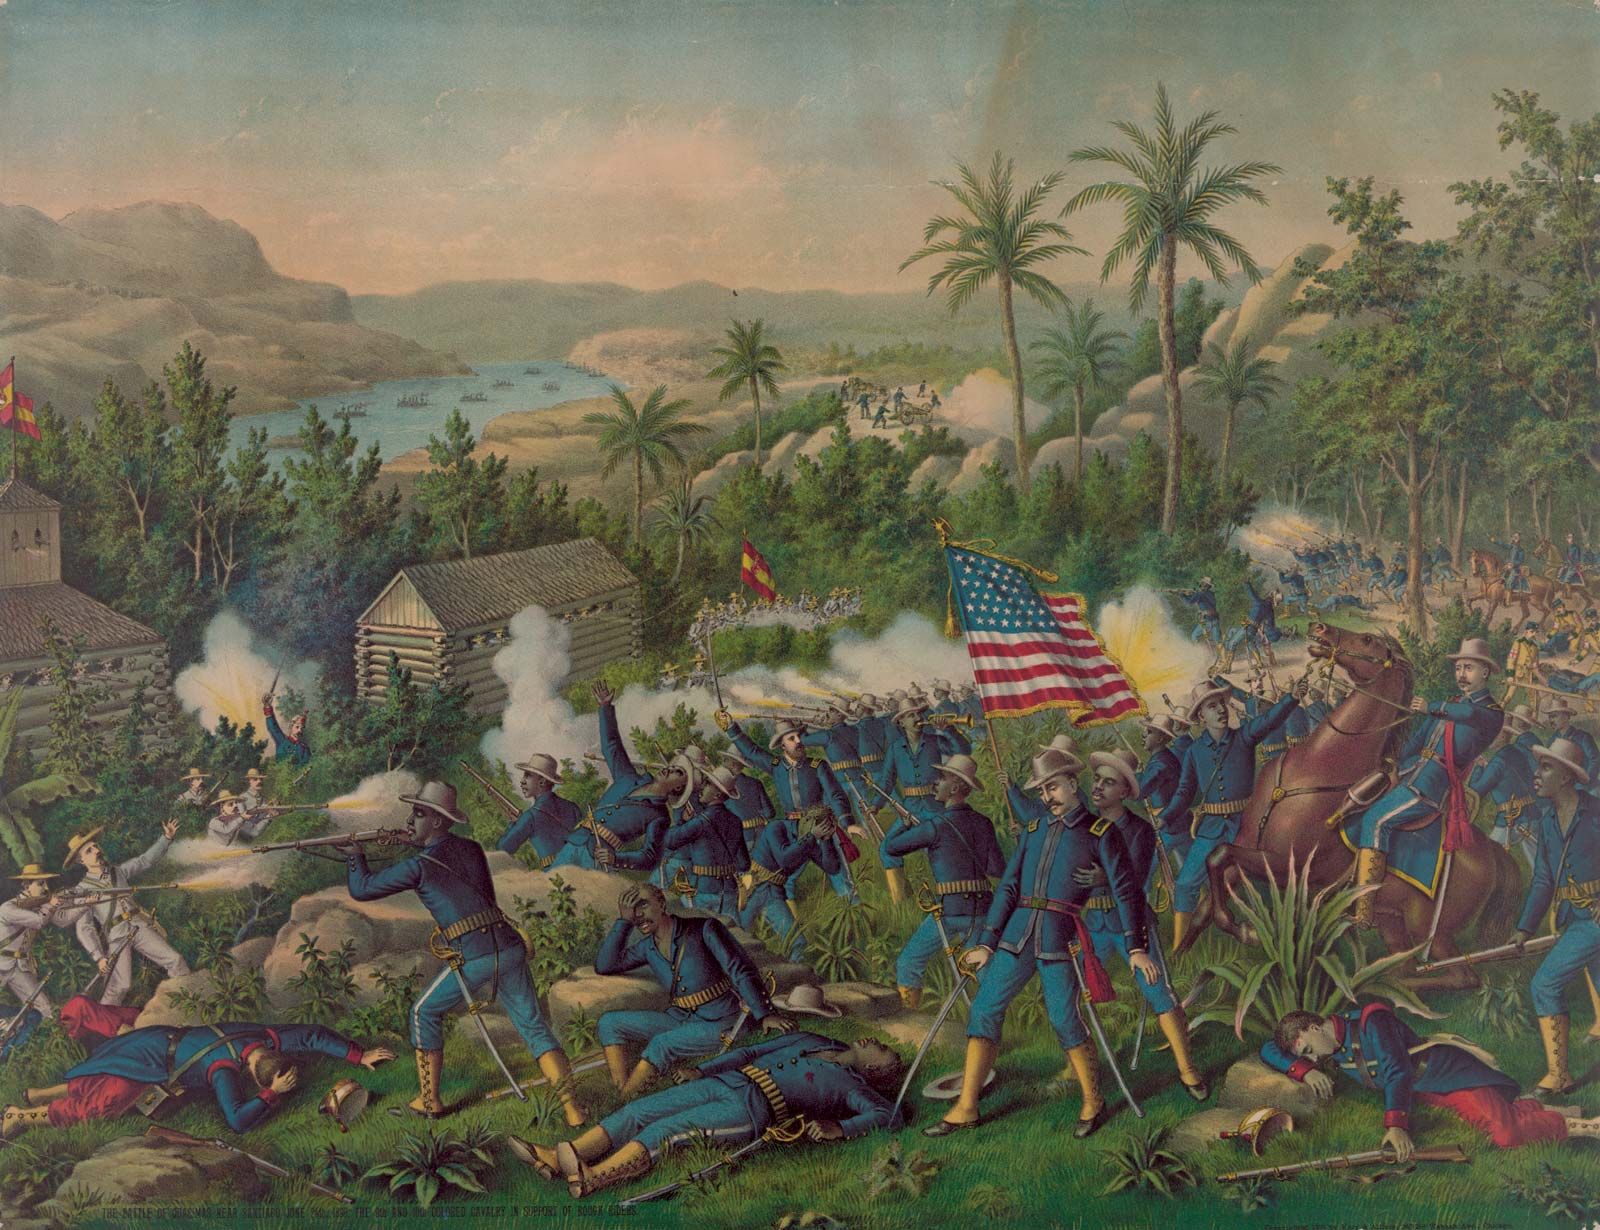 how did puerto ricans feel about the american invaders when spanish rule ended